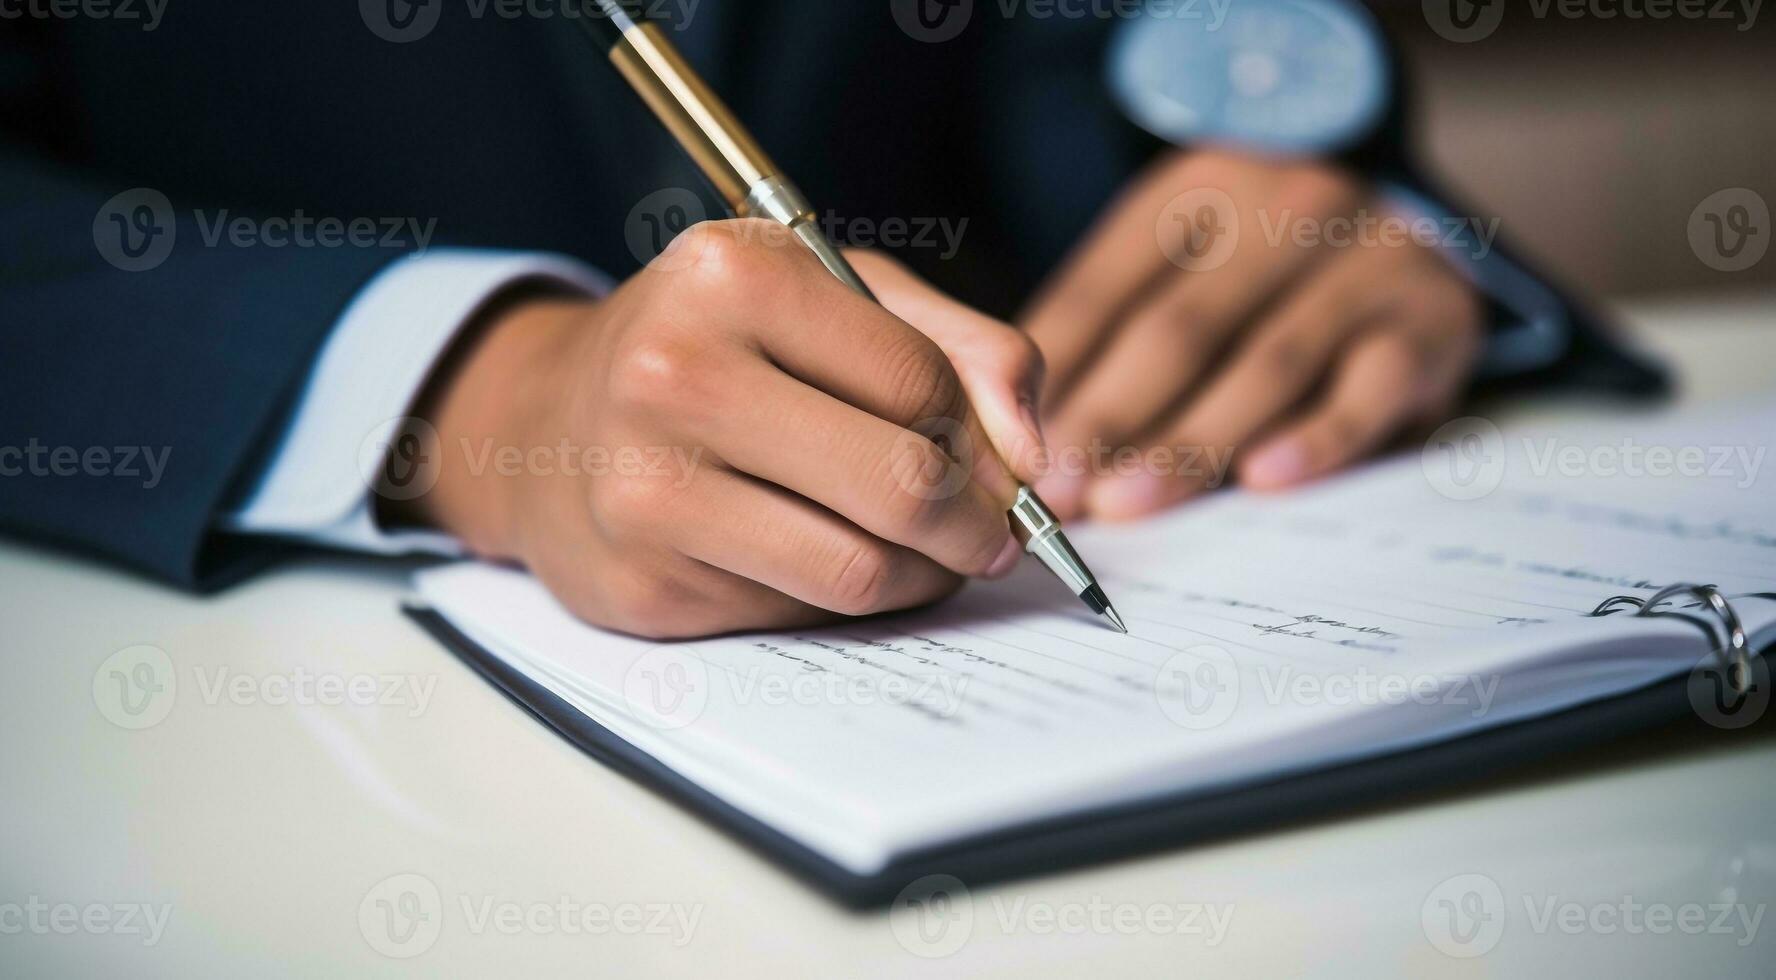 AI generated person signing a document, person writing on a notebook, close-up of bussinessman hand writing on a notebook with pen, person writing with pen photo